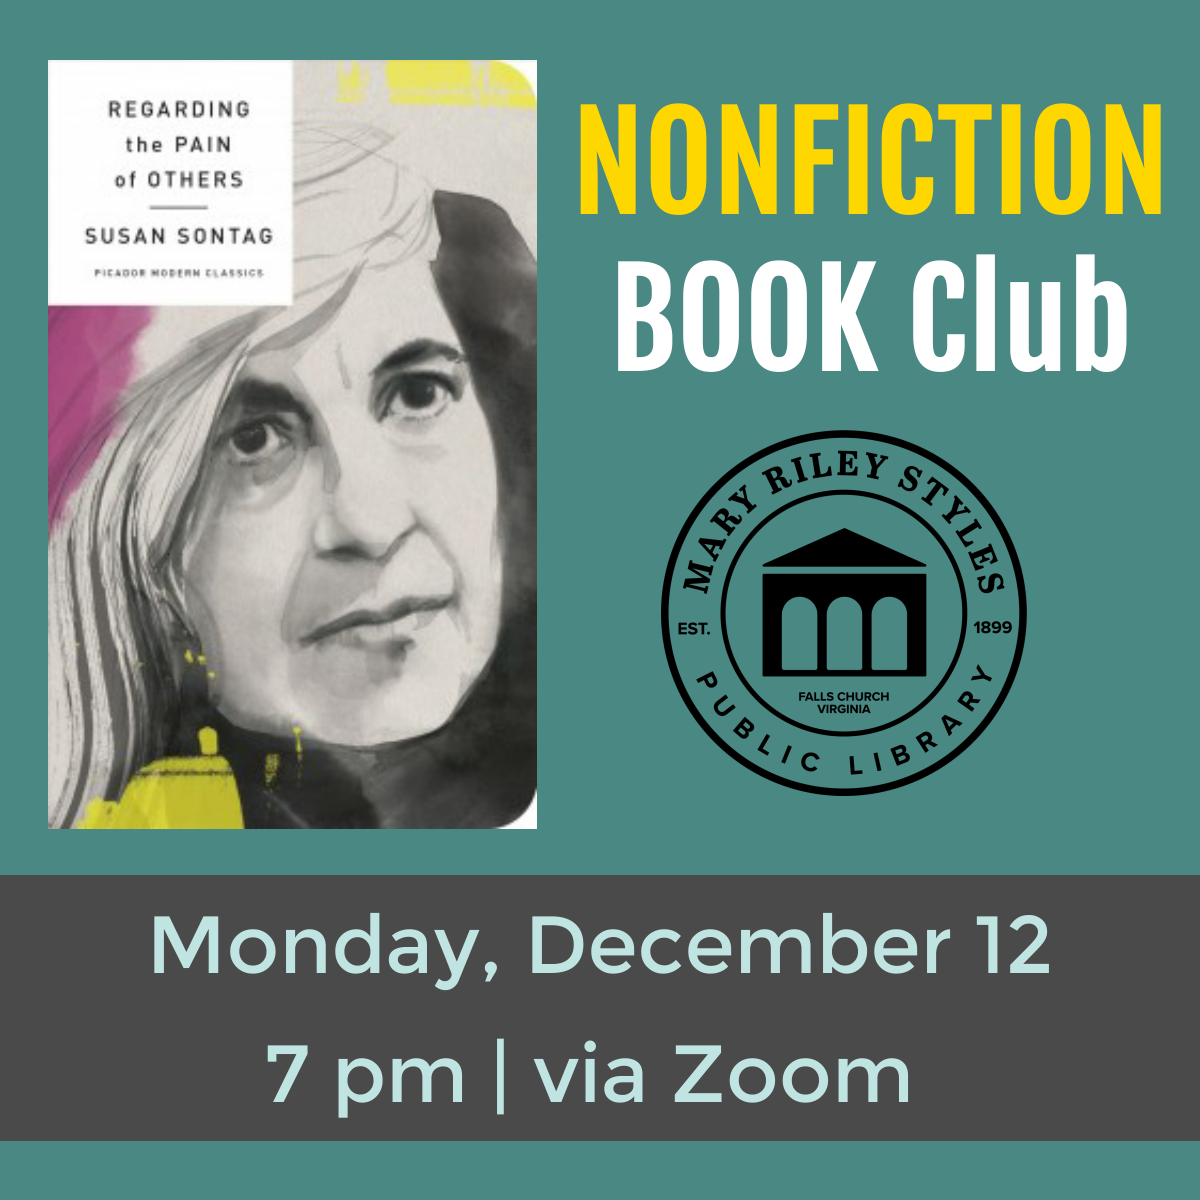 Nonfiction Book Club Monday December 12 at 7 pm via Zoom Regarding the Pain of Others by Susan Sontag